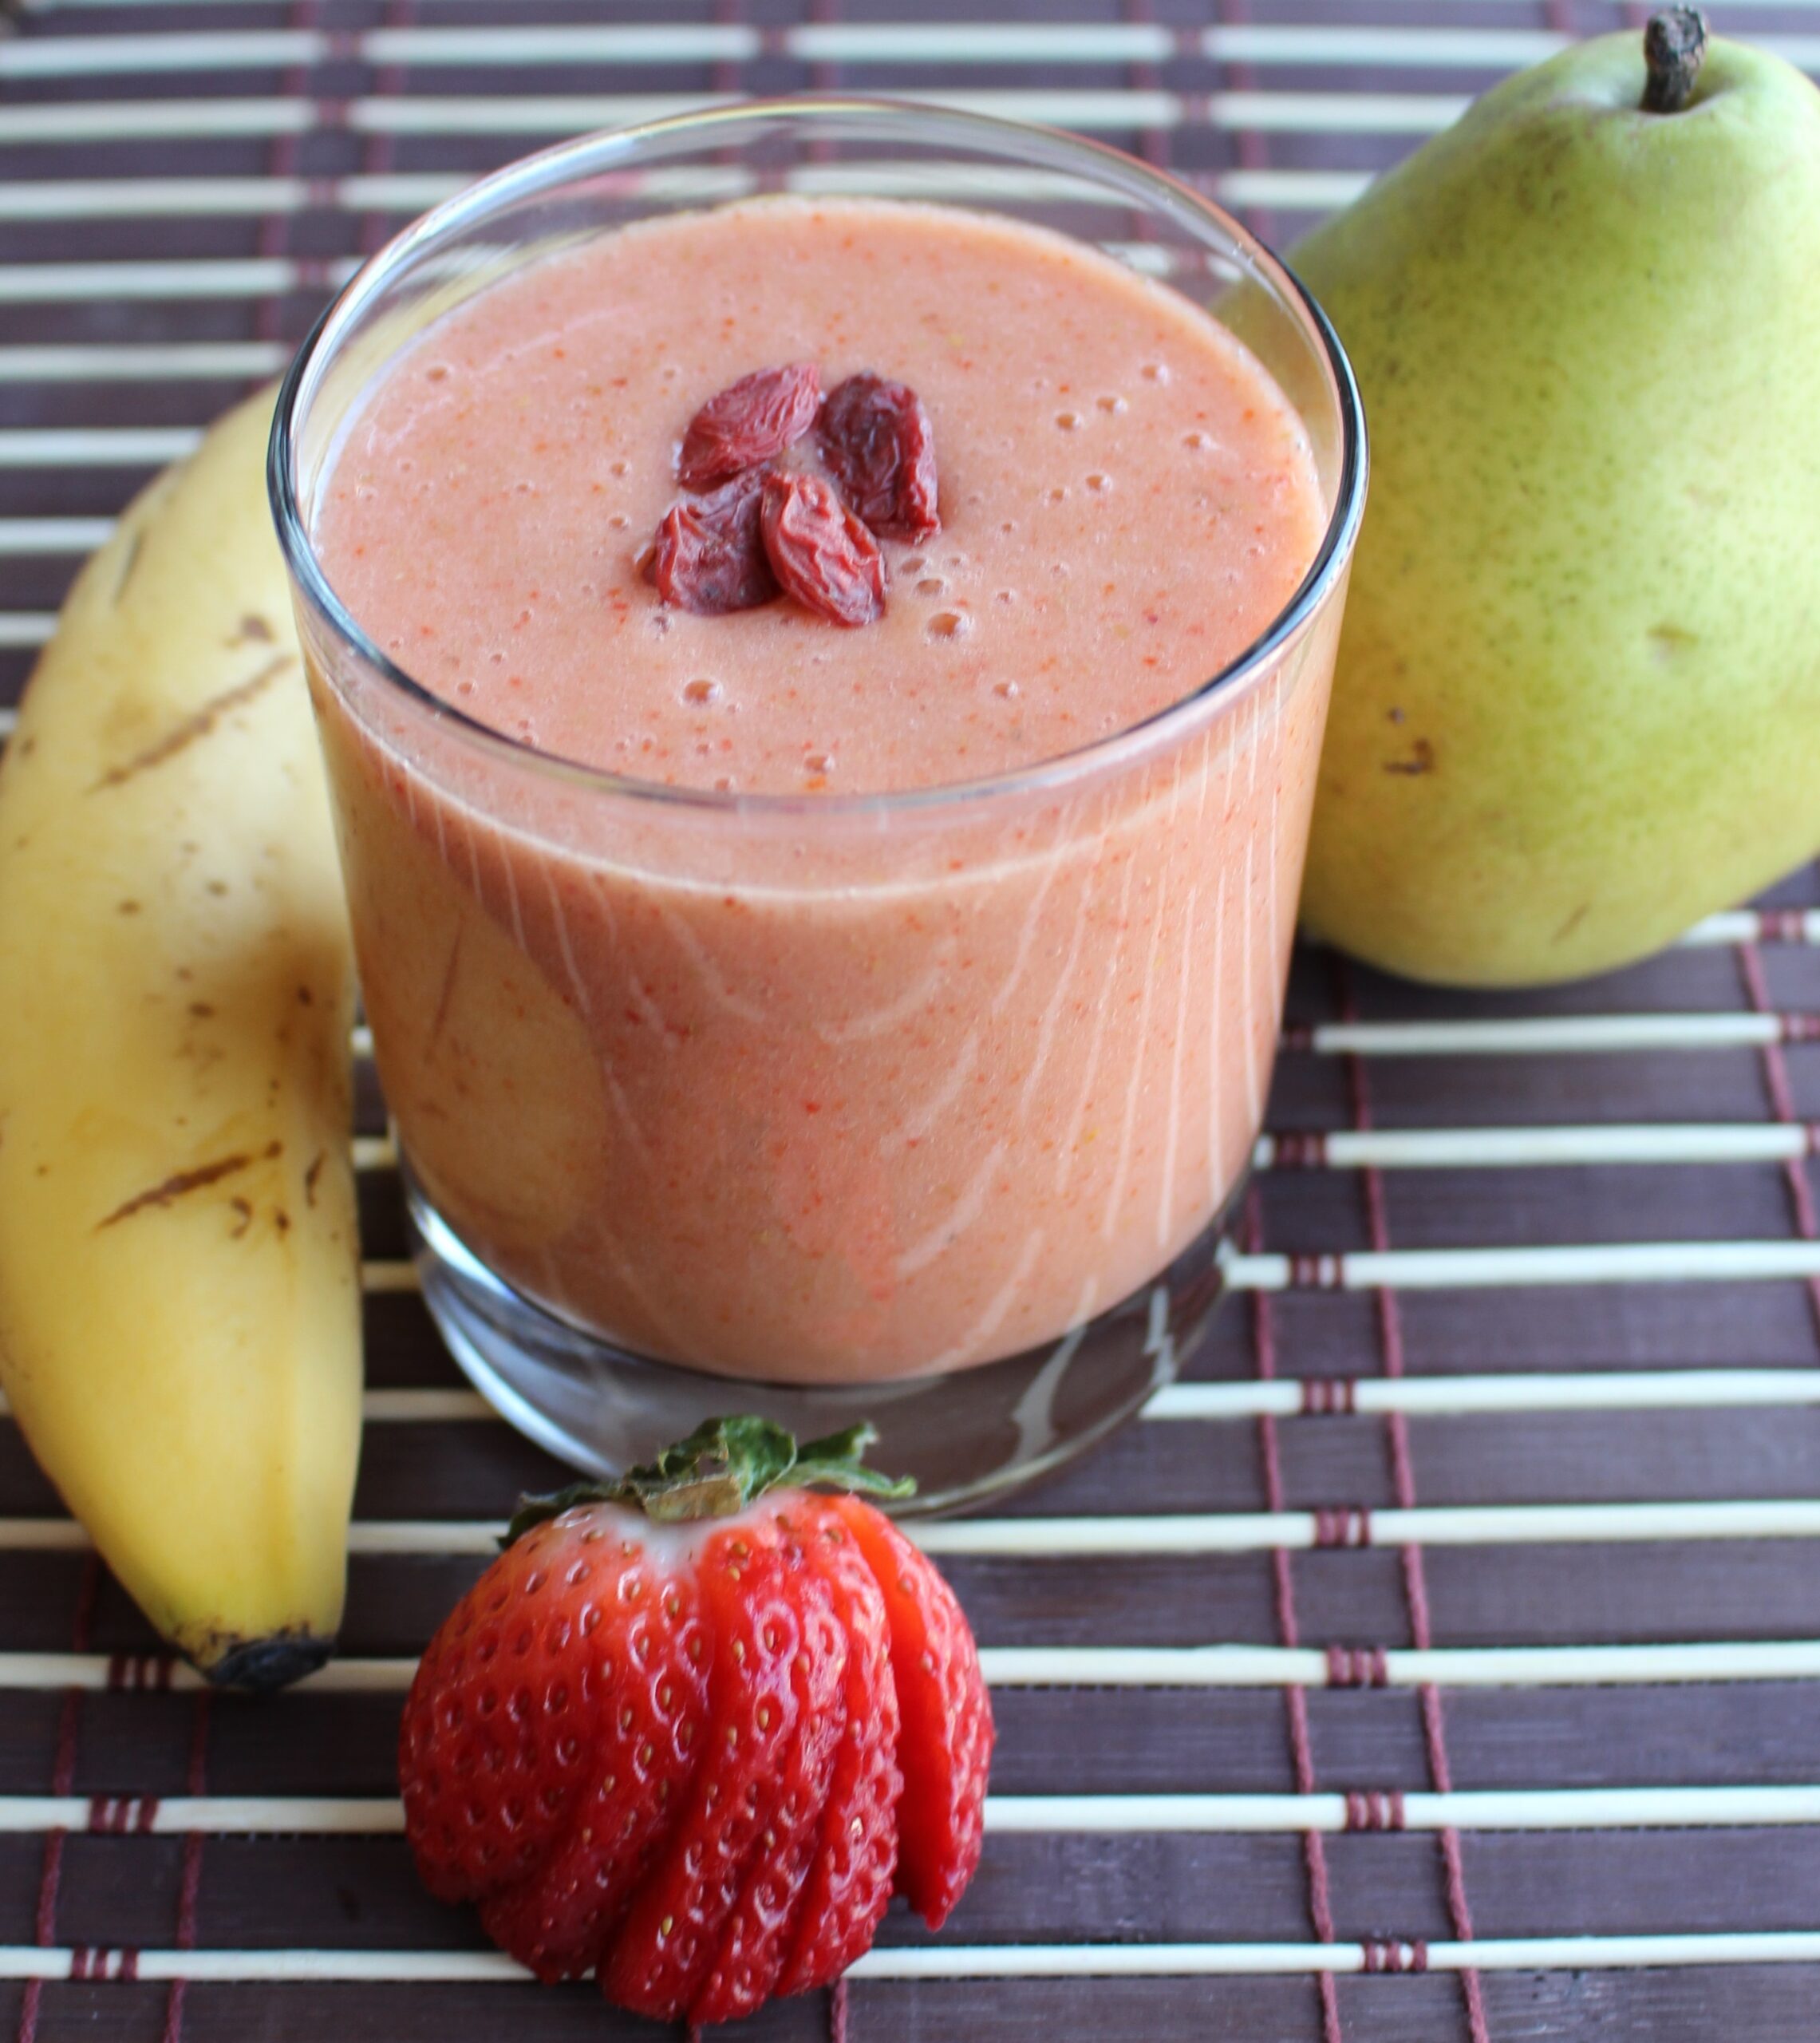 Strawberry smoothie with banana and pear on the side